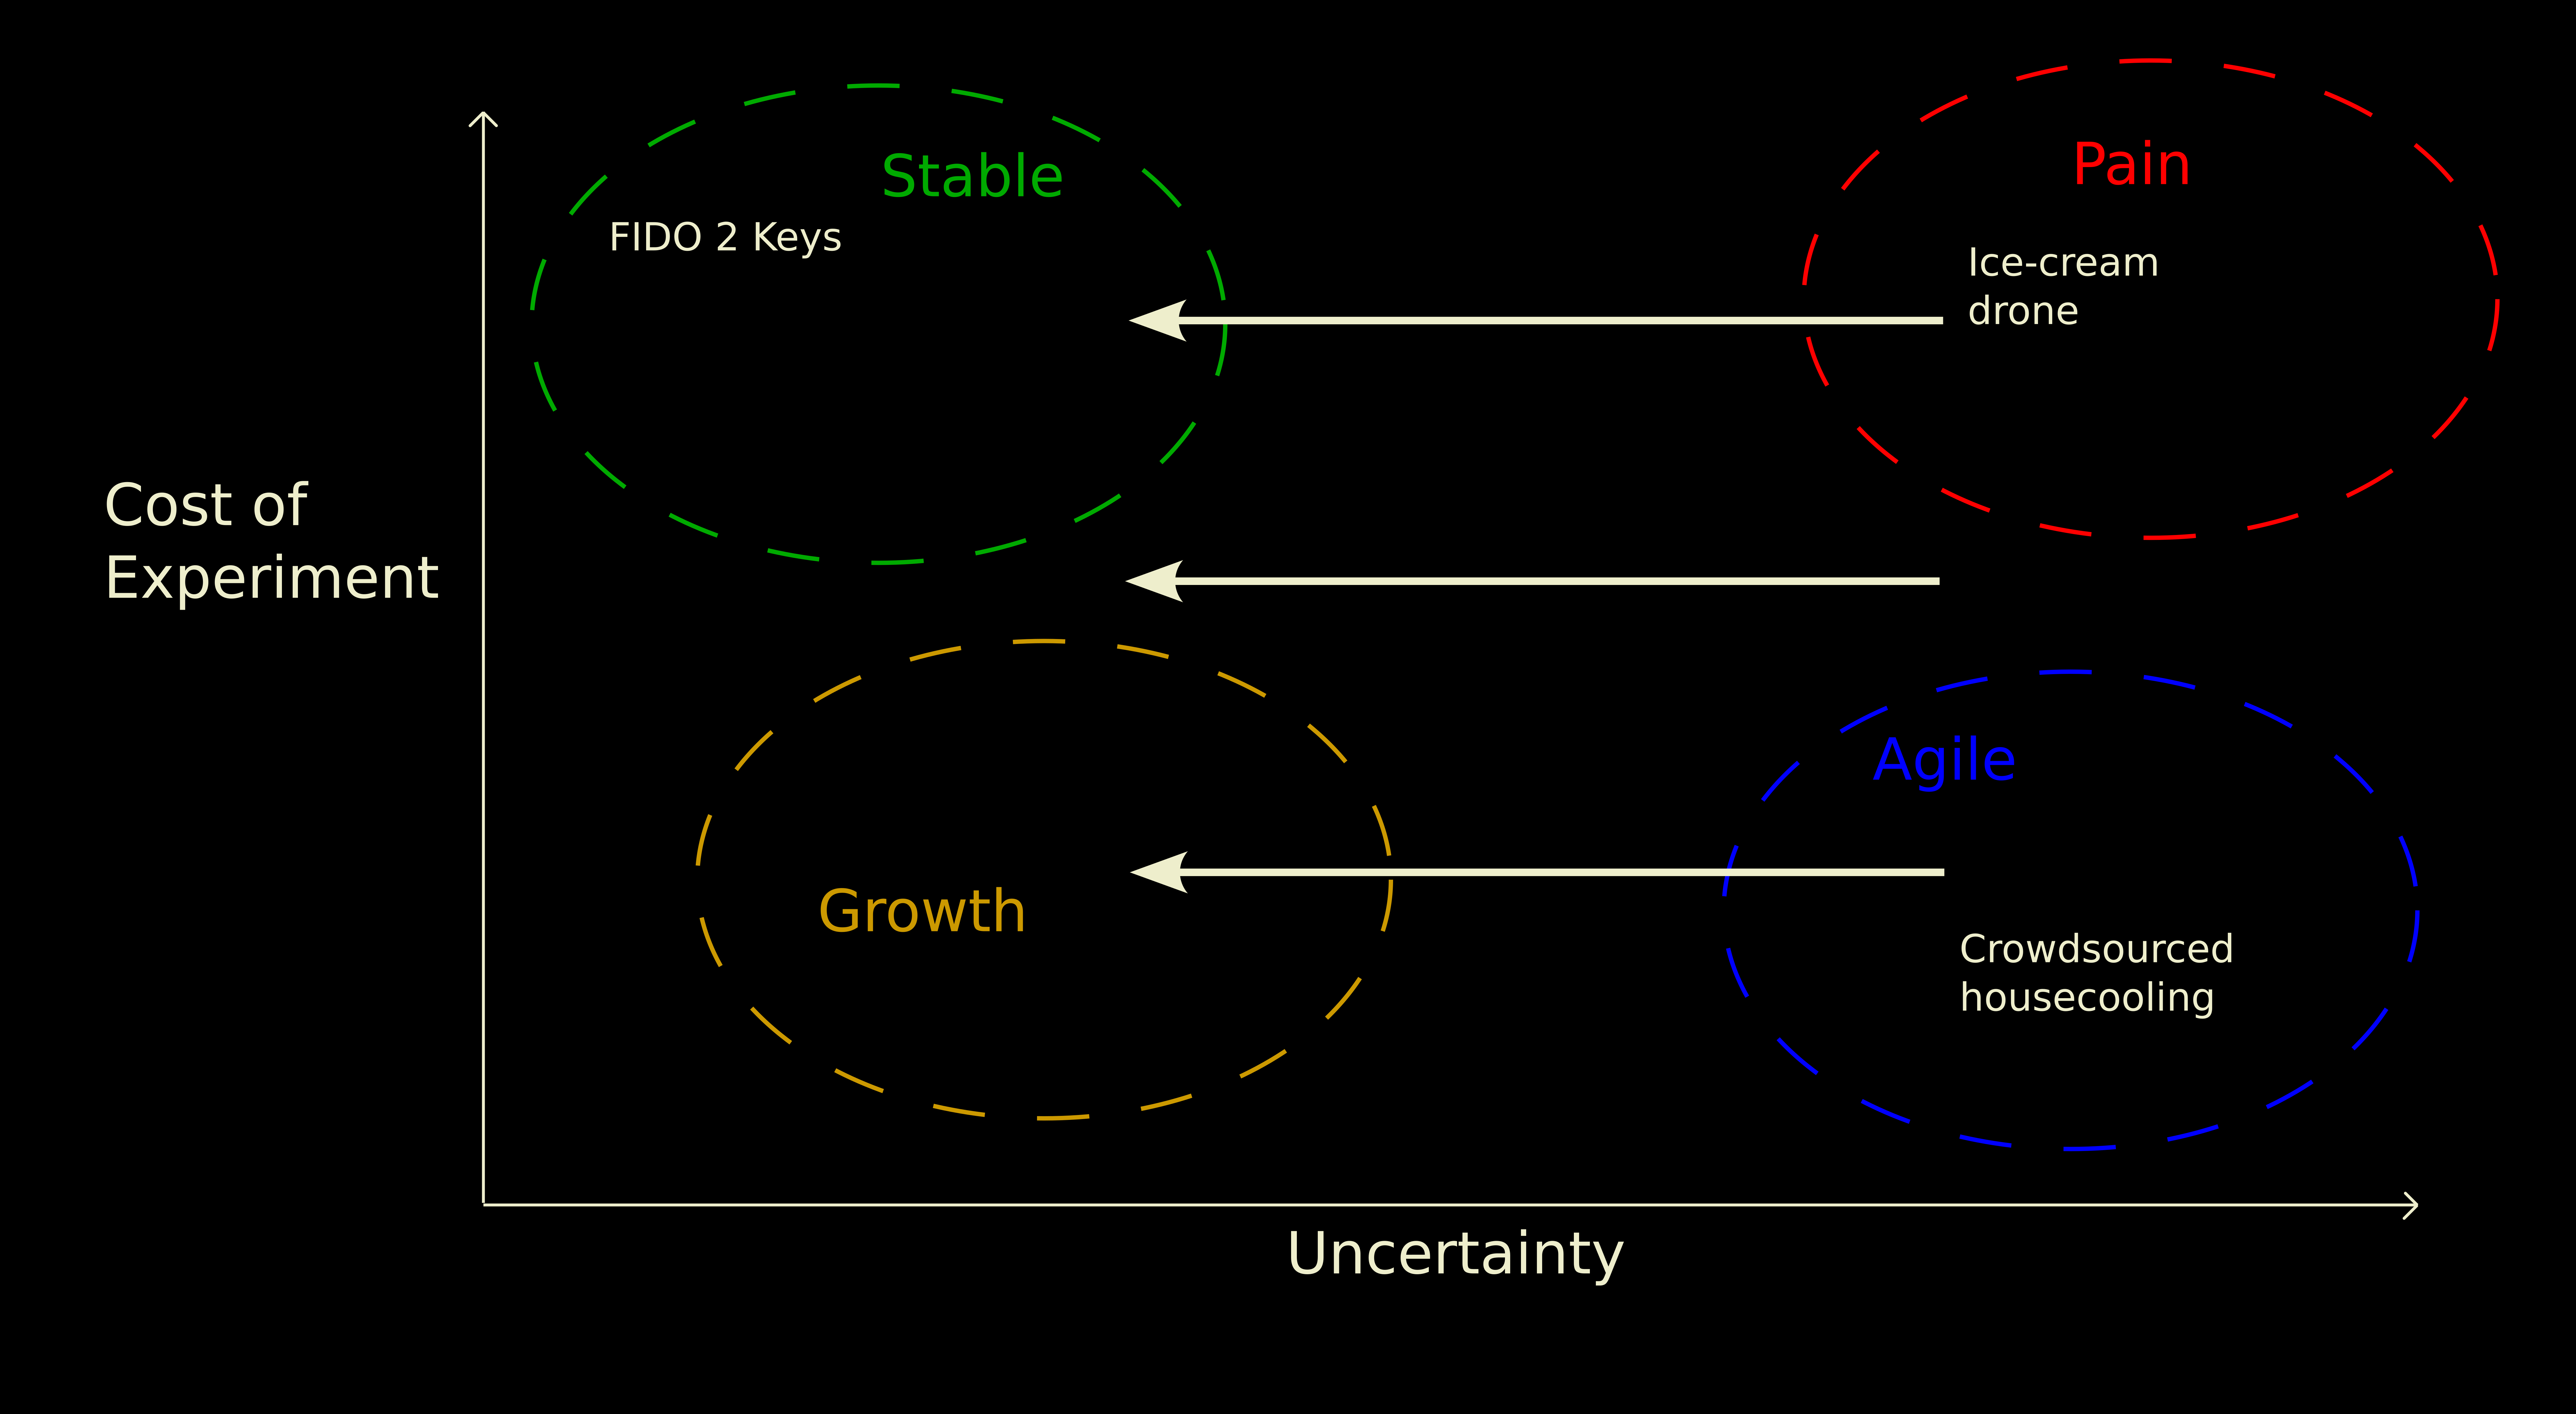 The same graph with arrows pointing left, towards less uncertainty. We can use them to move from the Agile zone on the bottom-right to the Growth zone on the bottom-left.